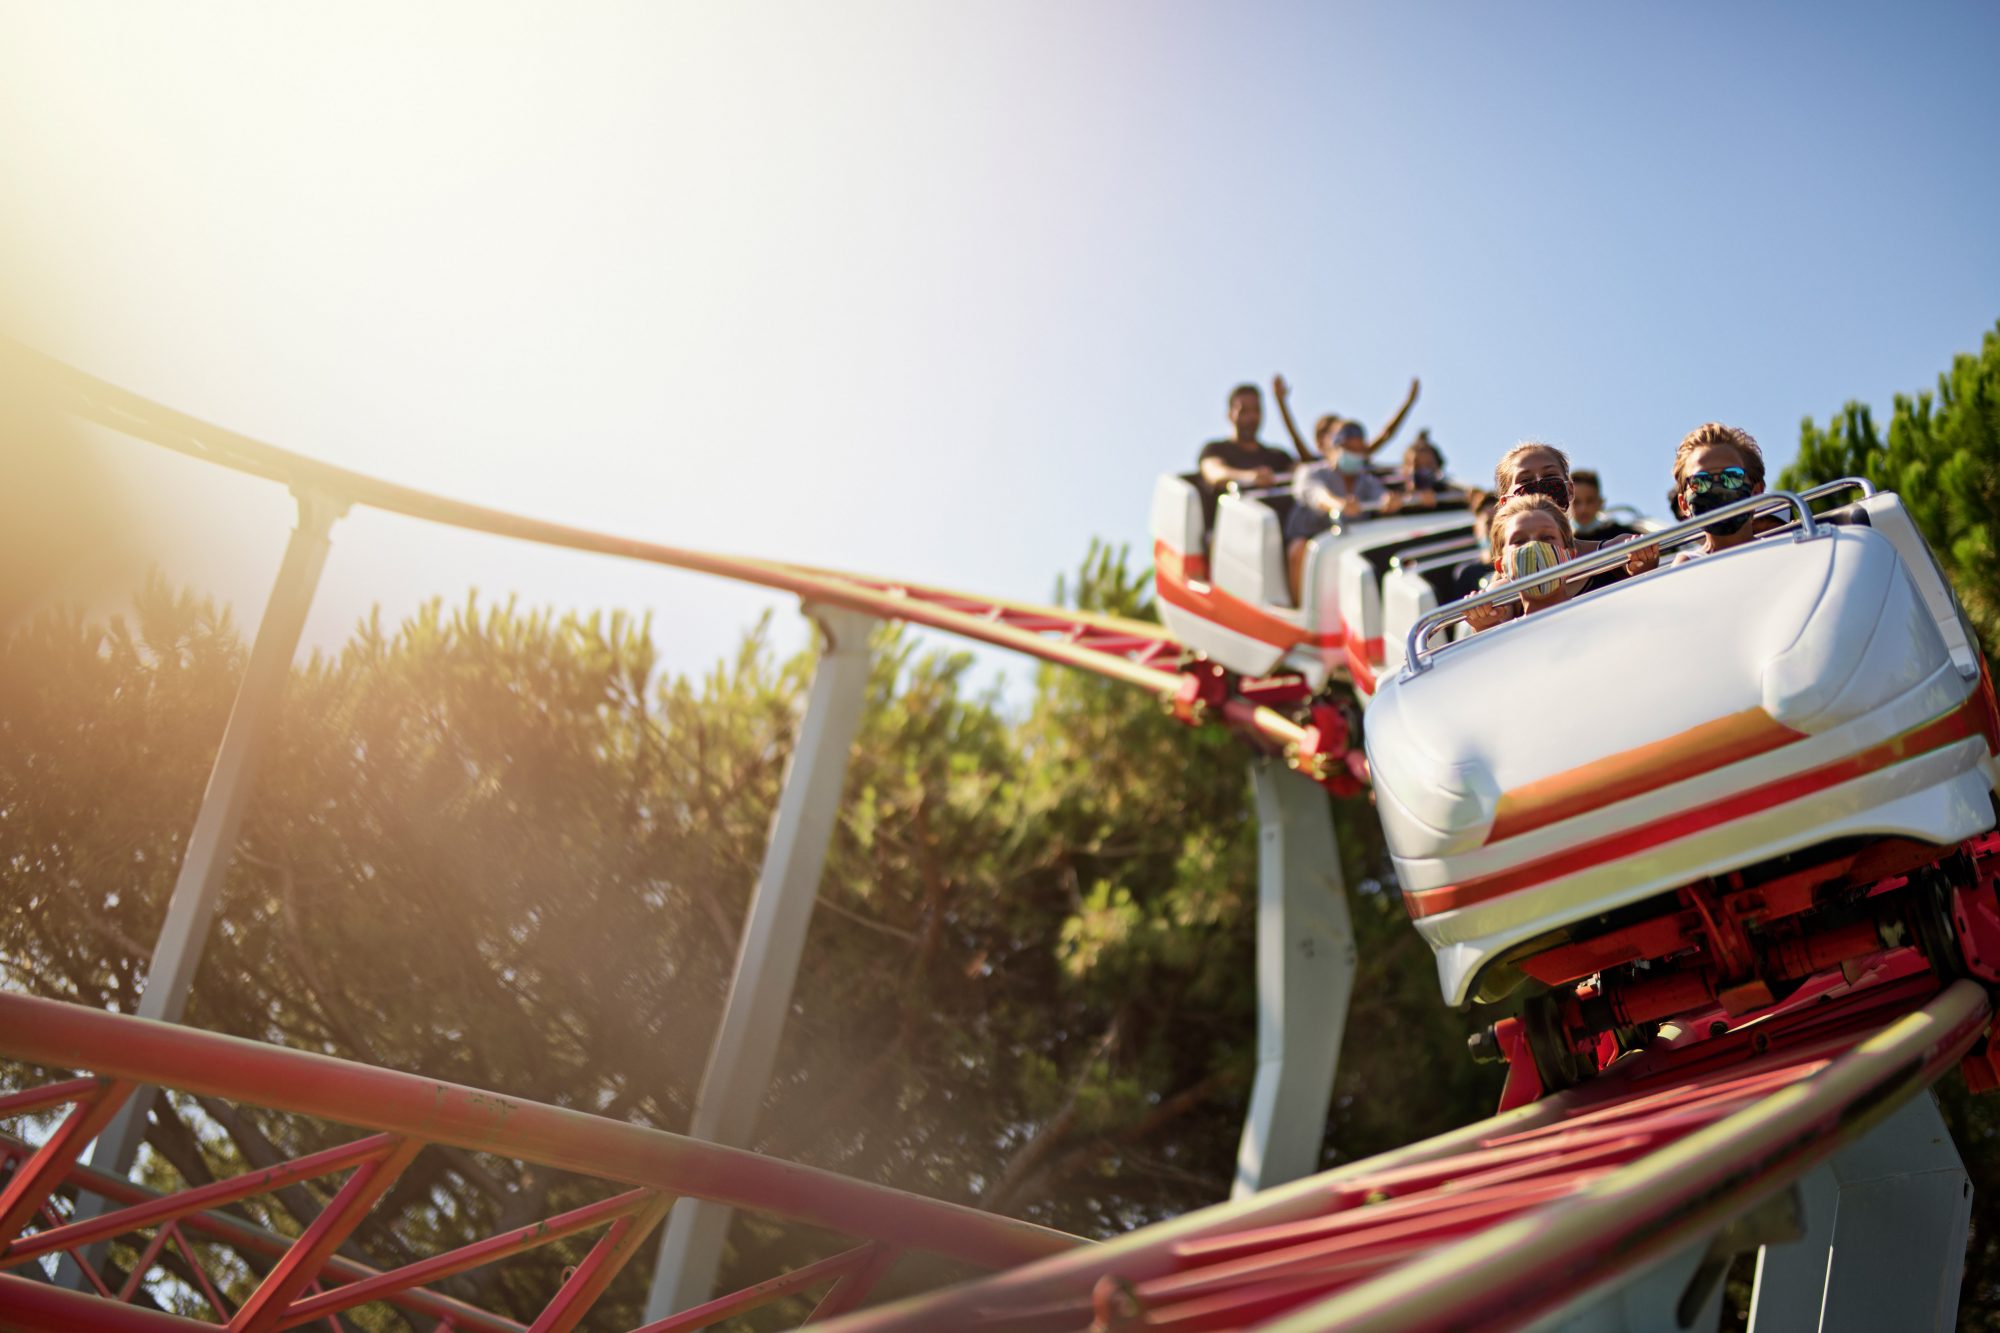 An image of people on a rollercoaster with masks on.